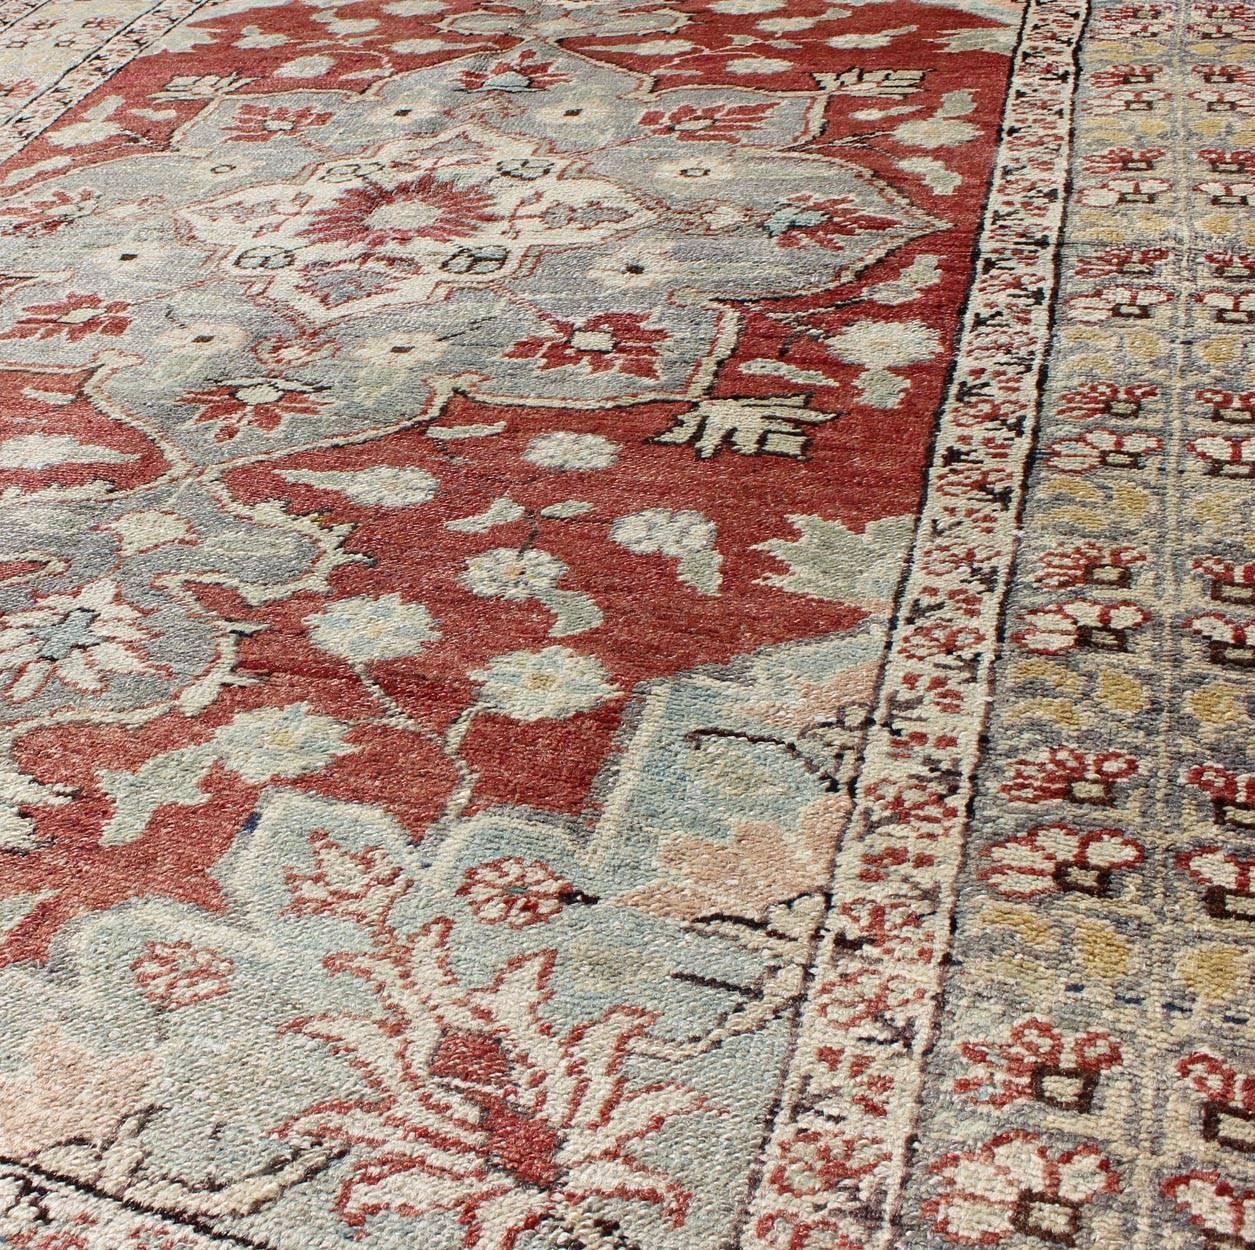 Vintage Turkish Sivas Fine Rug in Red, Light Blue, Gray & Light Yellow Green In Good Condition For Sale In Atlanta, GA